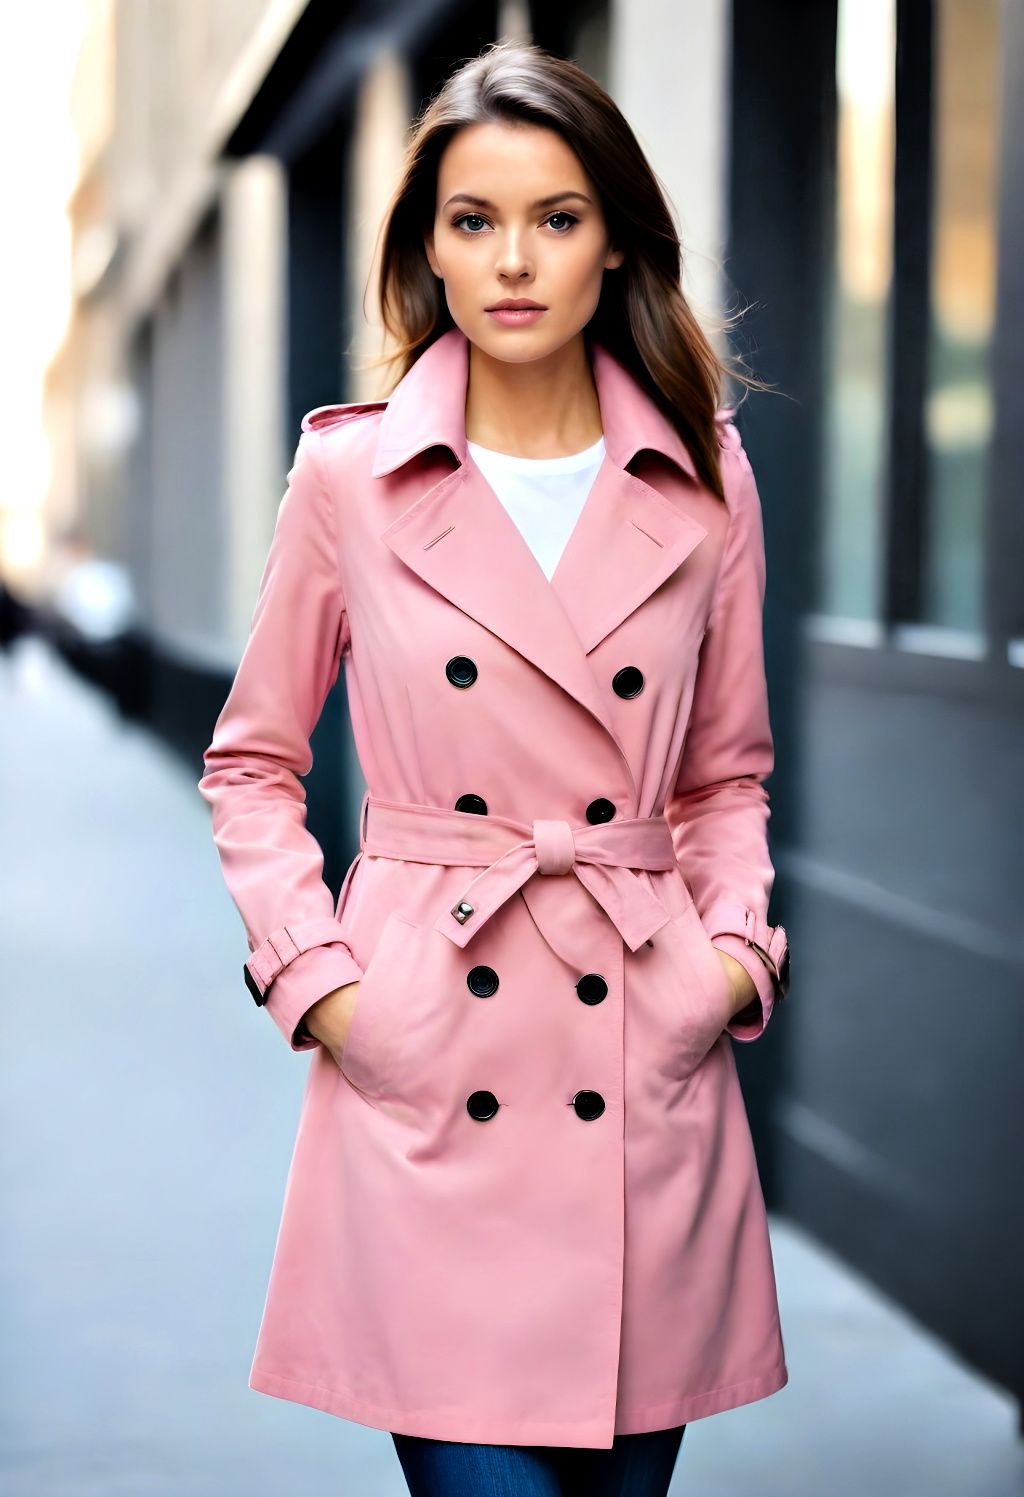 cute rose pink trench coat pink outfit